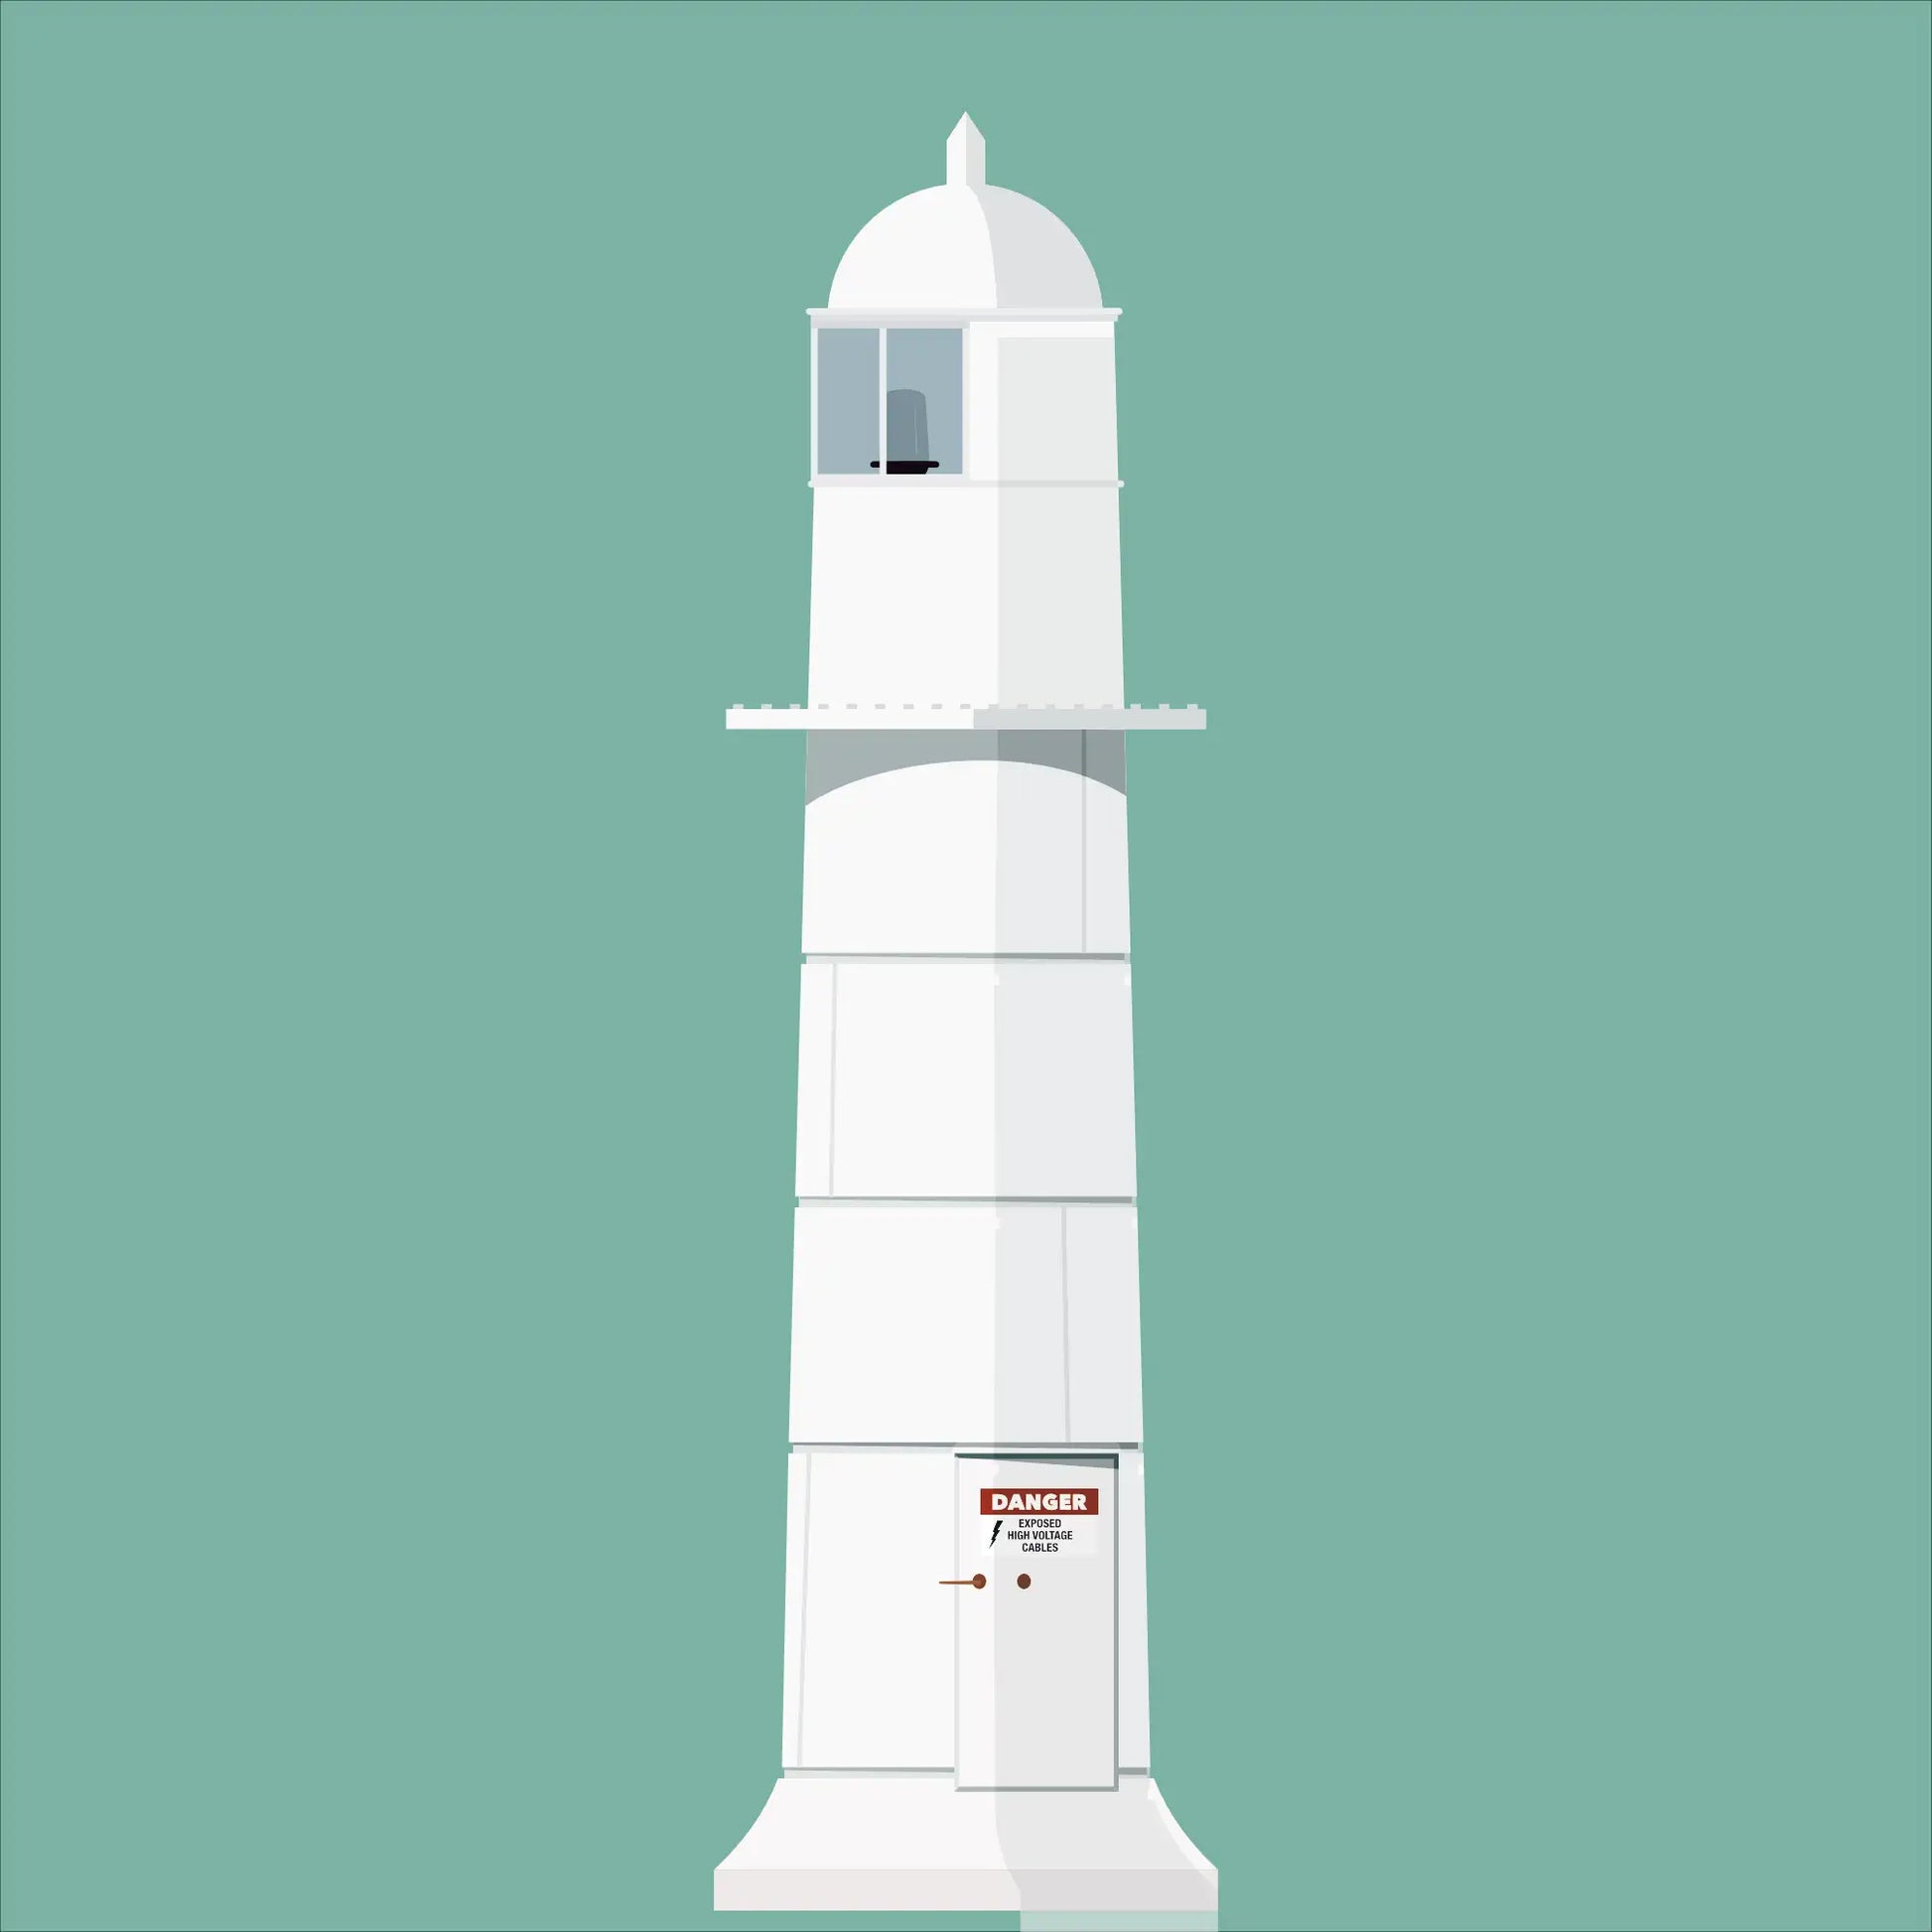 Contemporary graphic illustration of Barrack Point lighthouse on a white background inside light blue square.